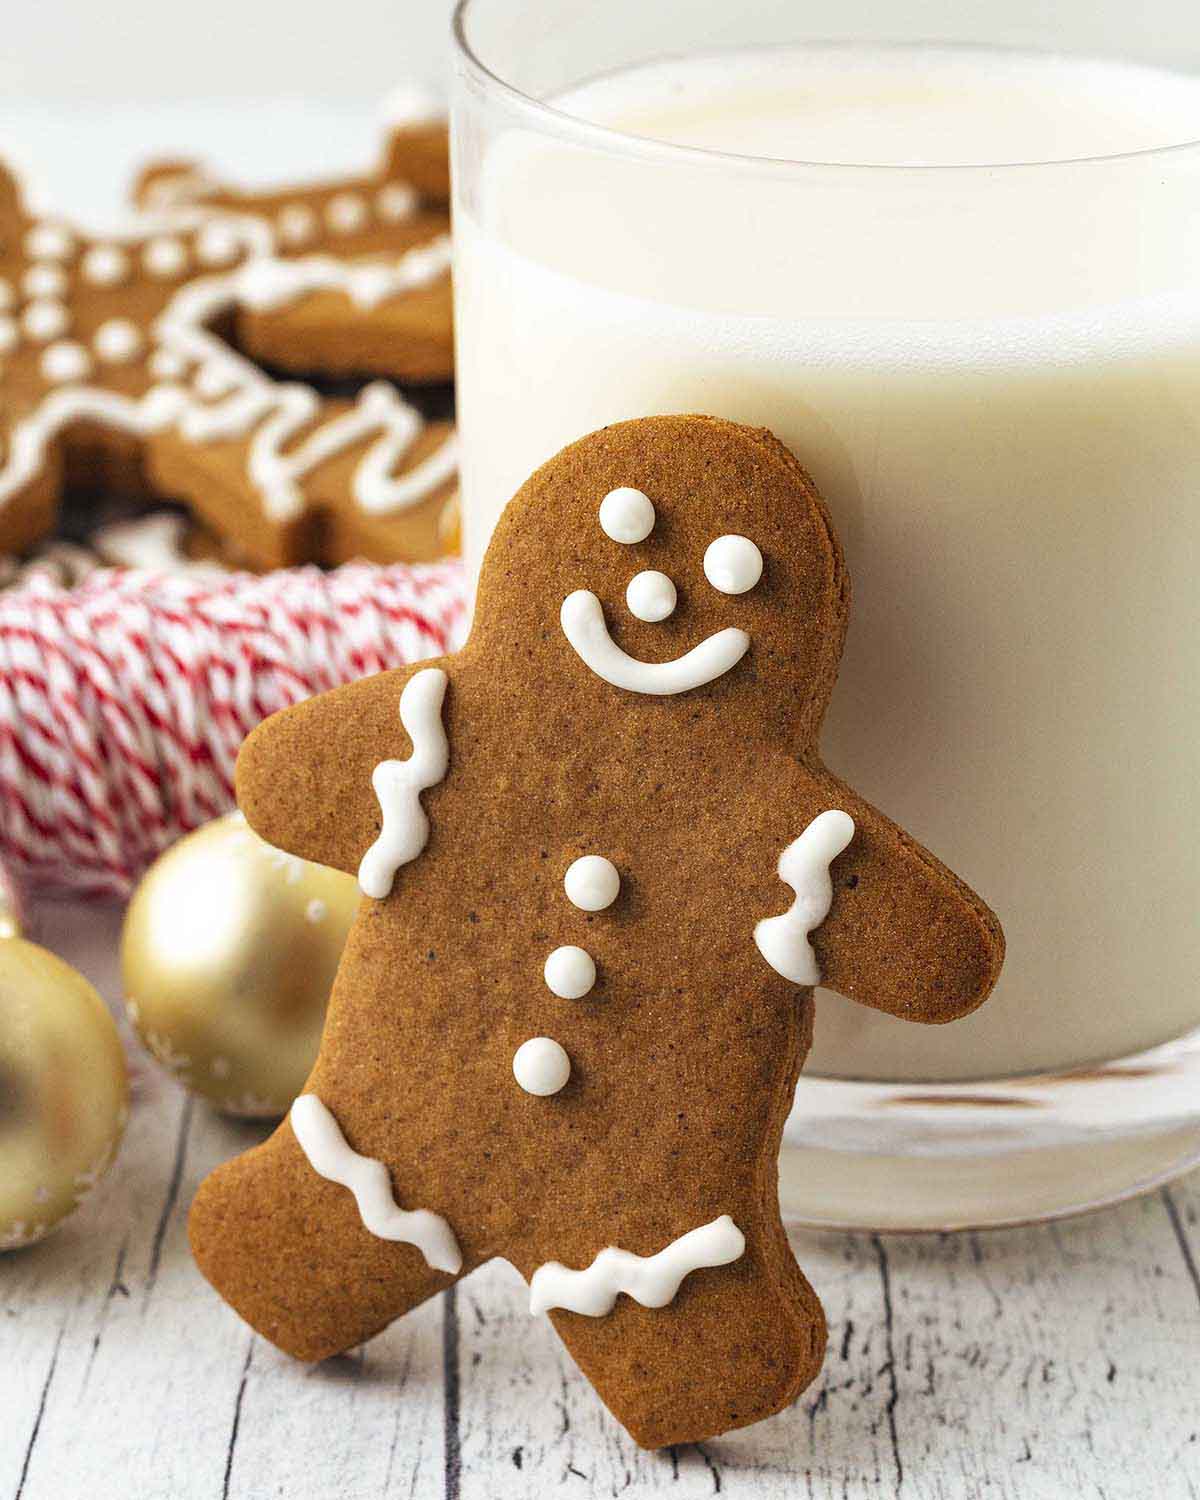 A gluten-free gingerbread man cookie leaning on a glass of dairy-free milk.